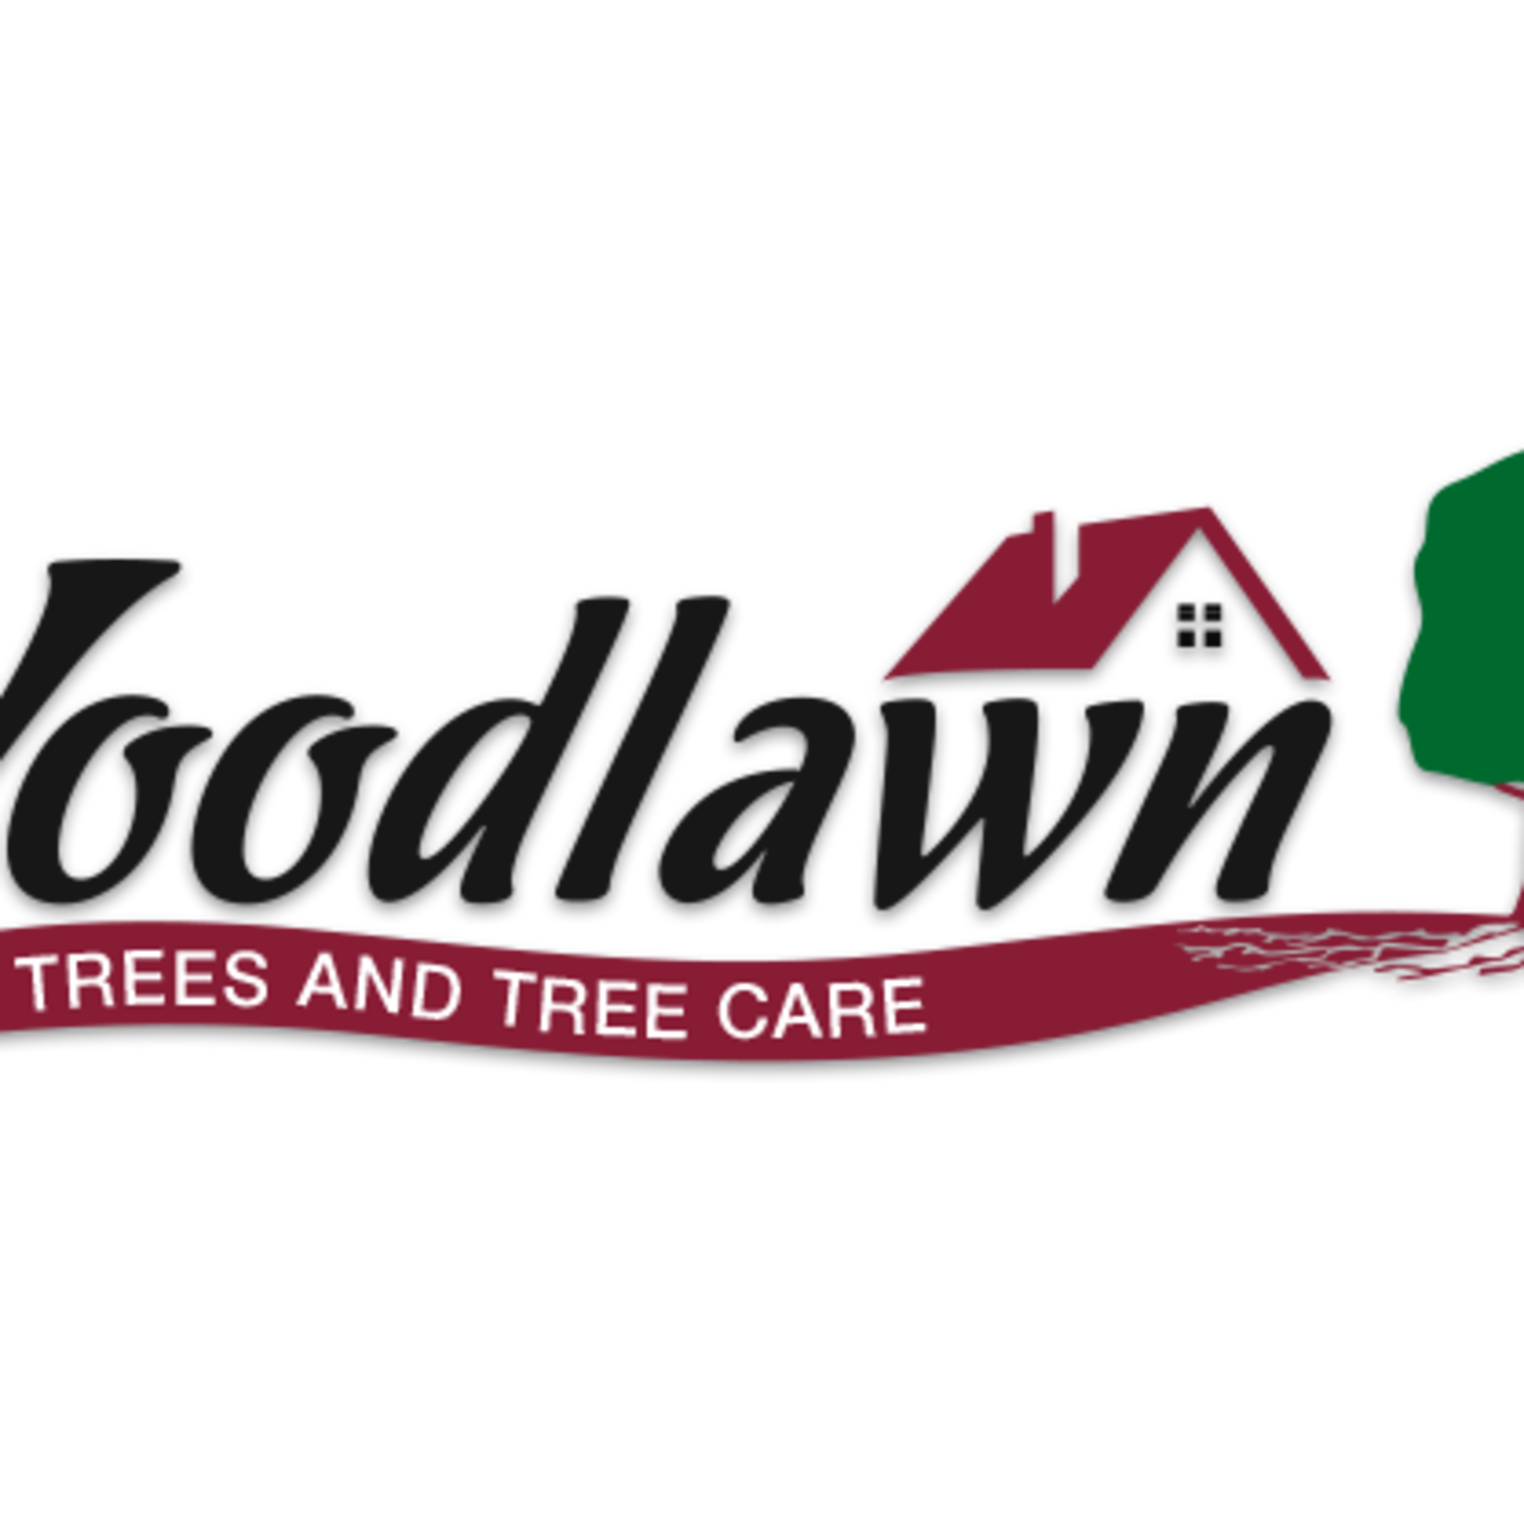 Woodlawn Trees and Tree Care